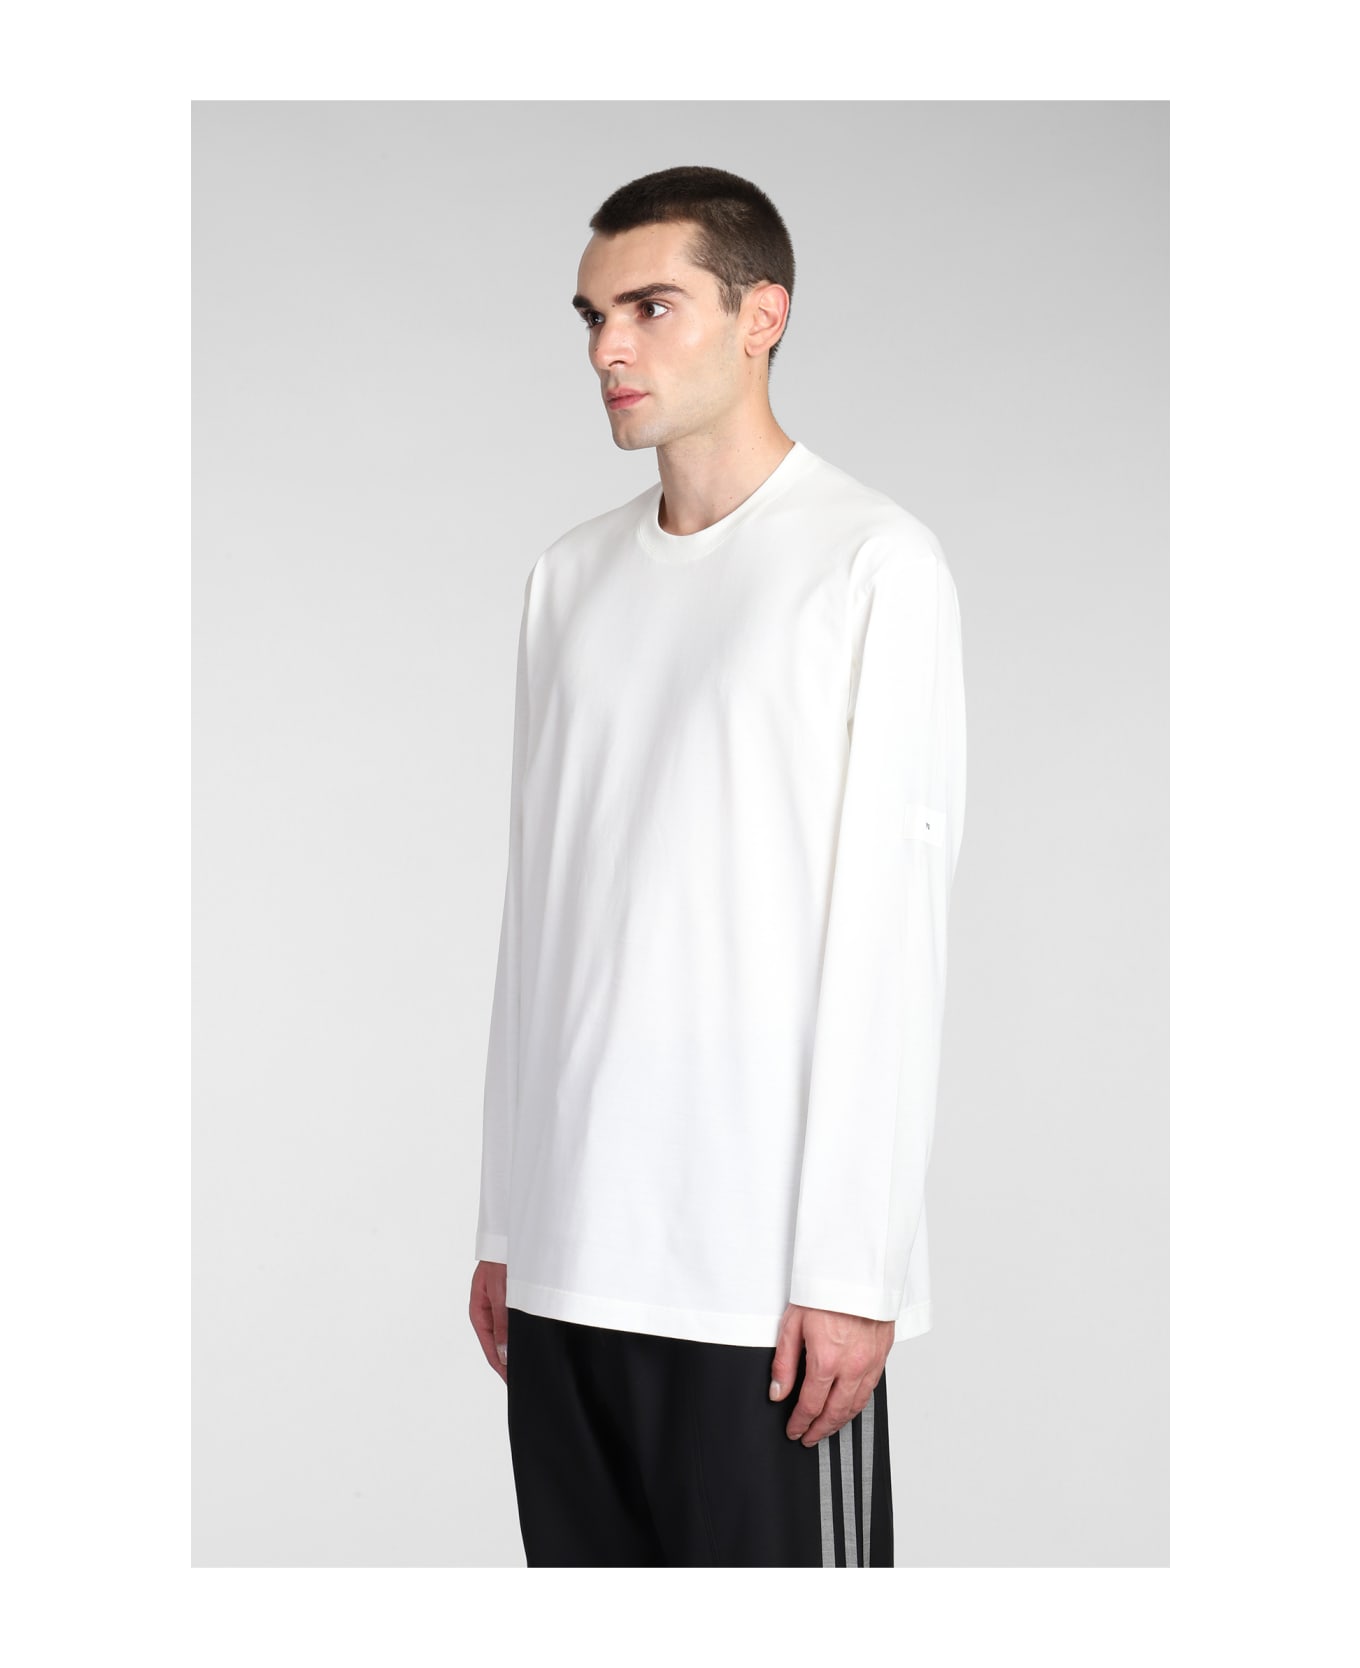 Y-3 Long-sleeved T-shirt - White シャツ